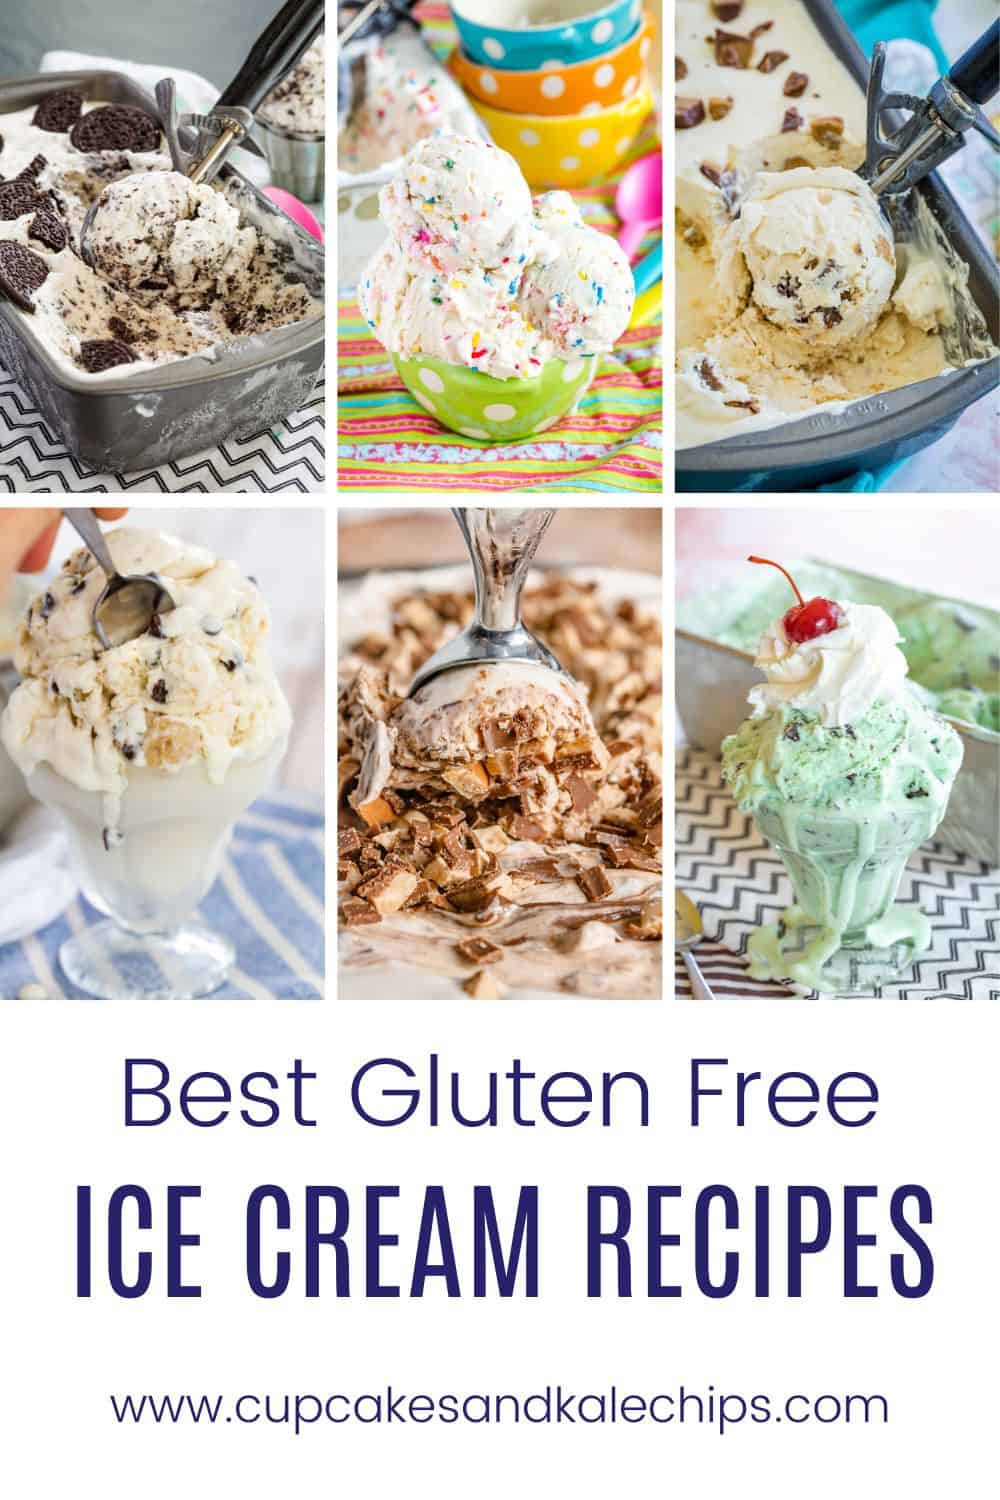 Is Ice Cream Gluten Free? | Cupcakes & Kale Chips